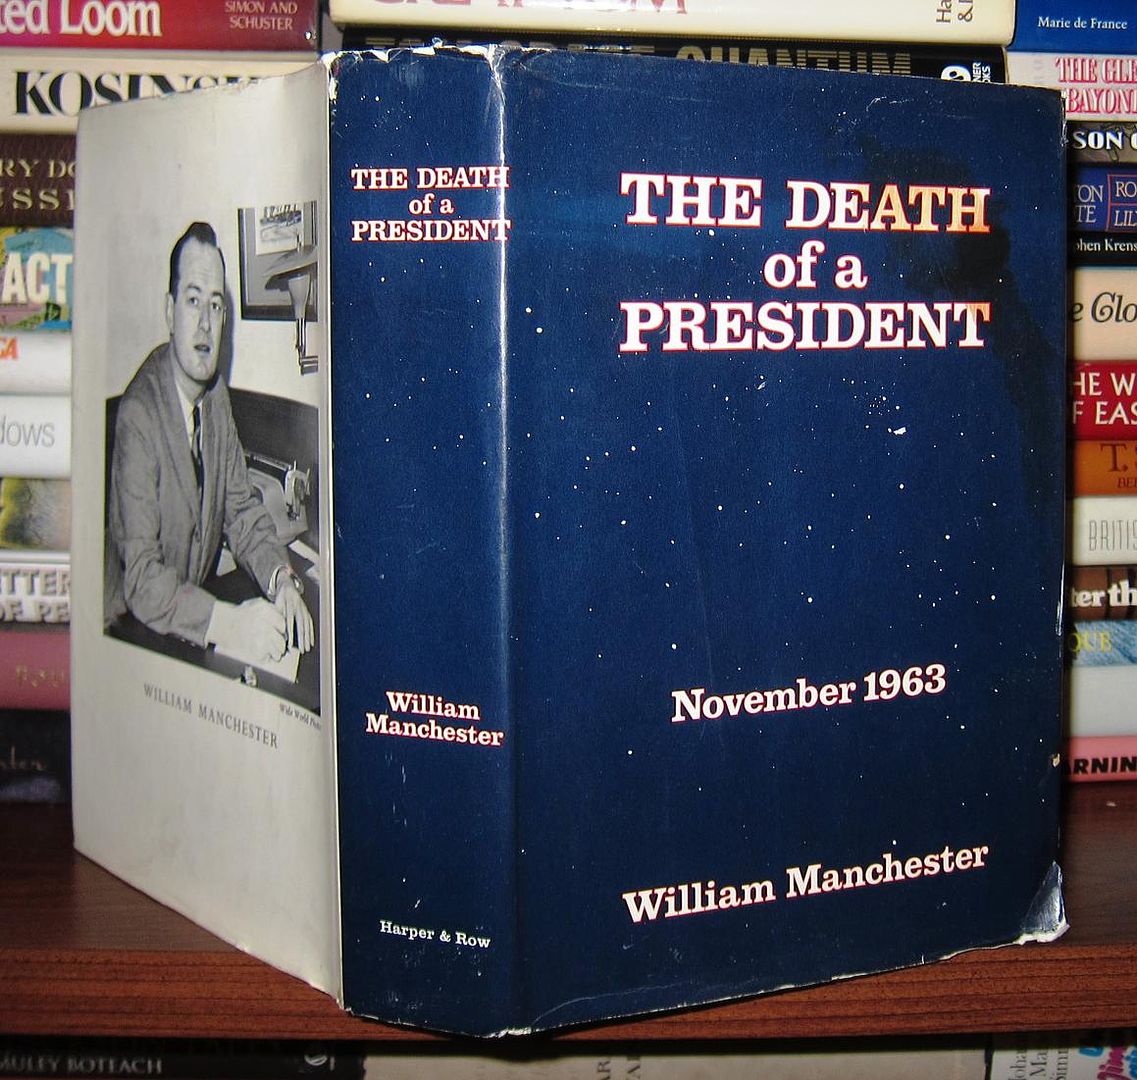 MANCHESTER, WILLIAM - The Death of a President November 1963